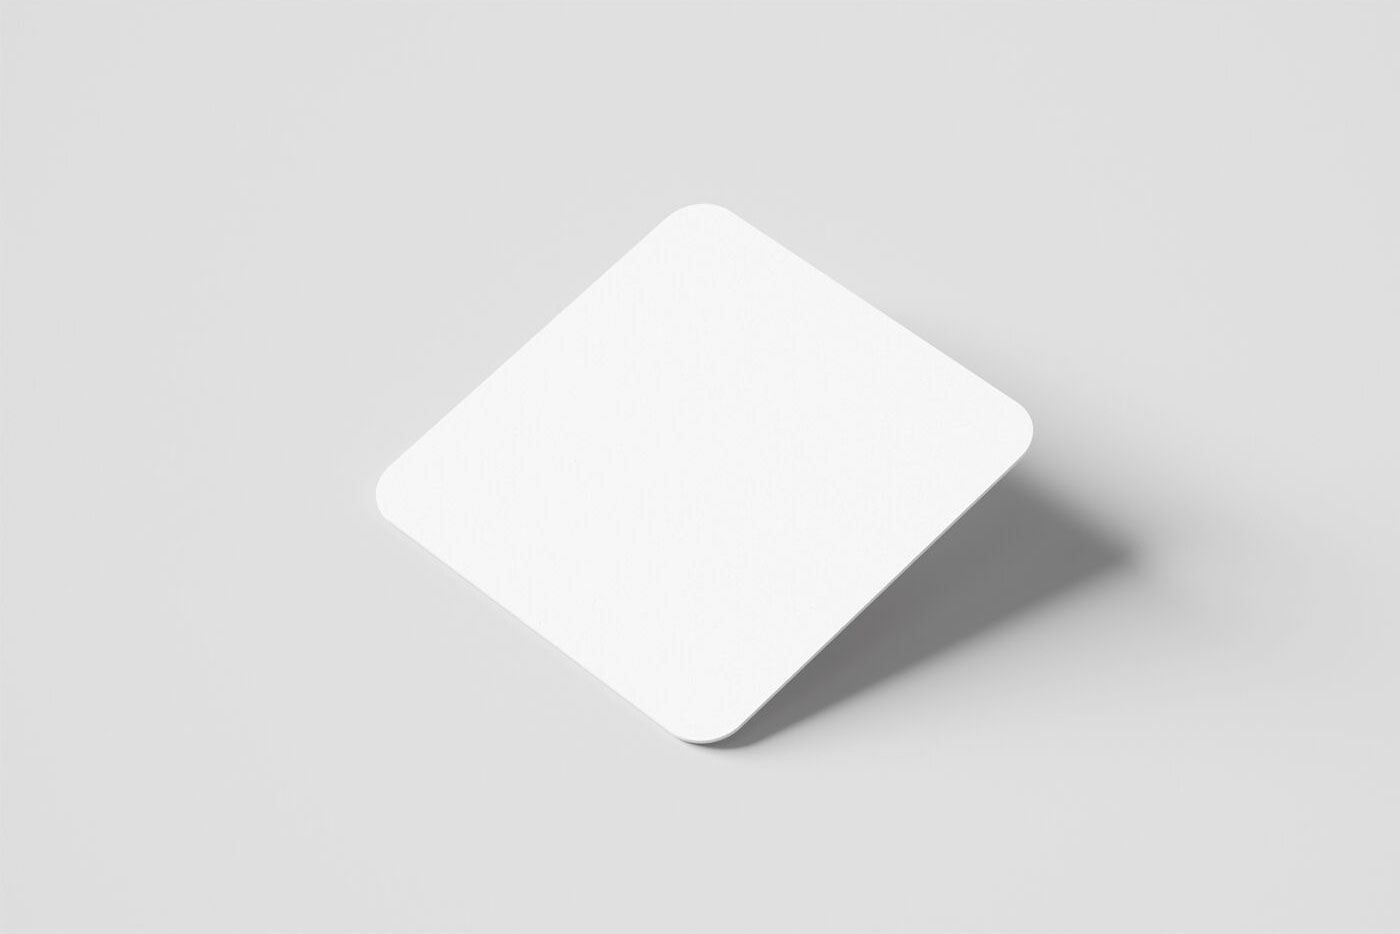 Mockup Showing a Simple Square Coaster FREE PSD